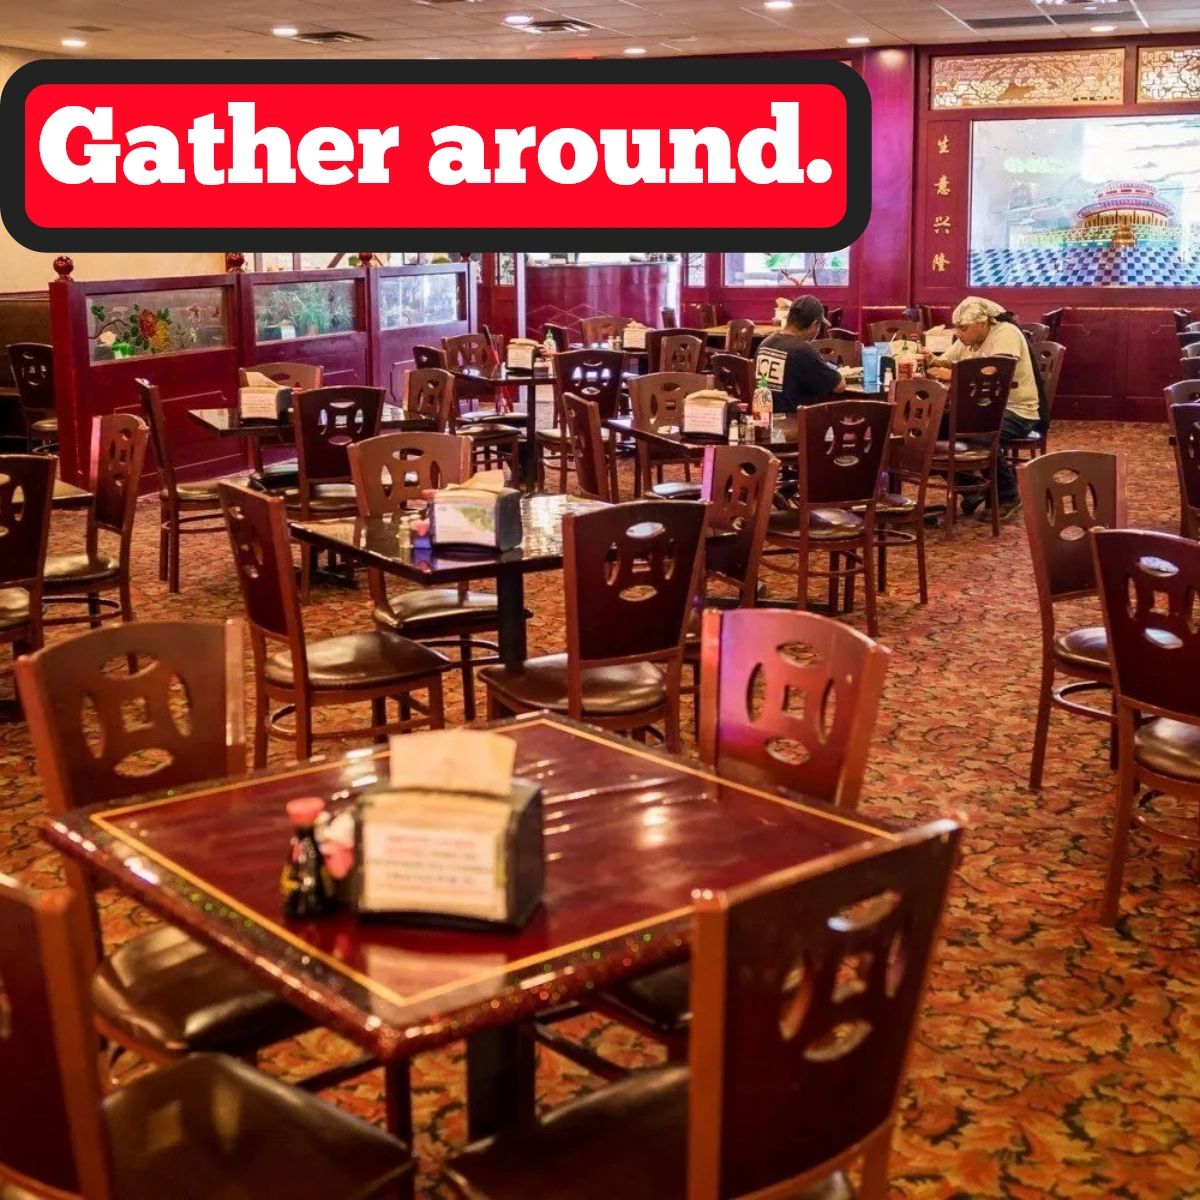 Here at China King Buffet, we'll always save you a seat at the table. Come visit our delicious Chinese buffet soon! #ChinaKingBuffet #ChineseBuffet #ChineseFood #MongolianBBQ #sushi #CrabLegs #SanAntonioFoodie #EatLocal